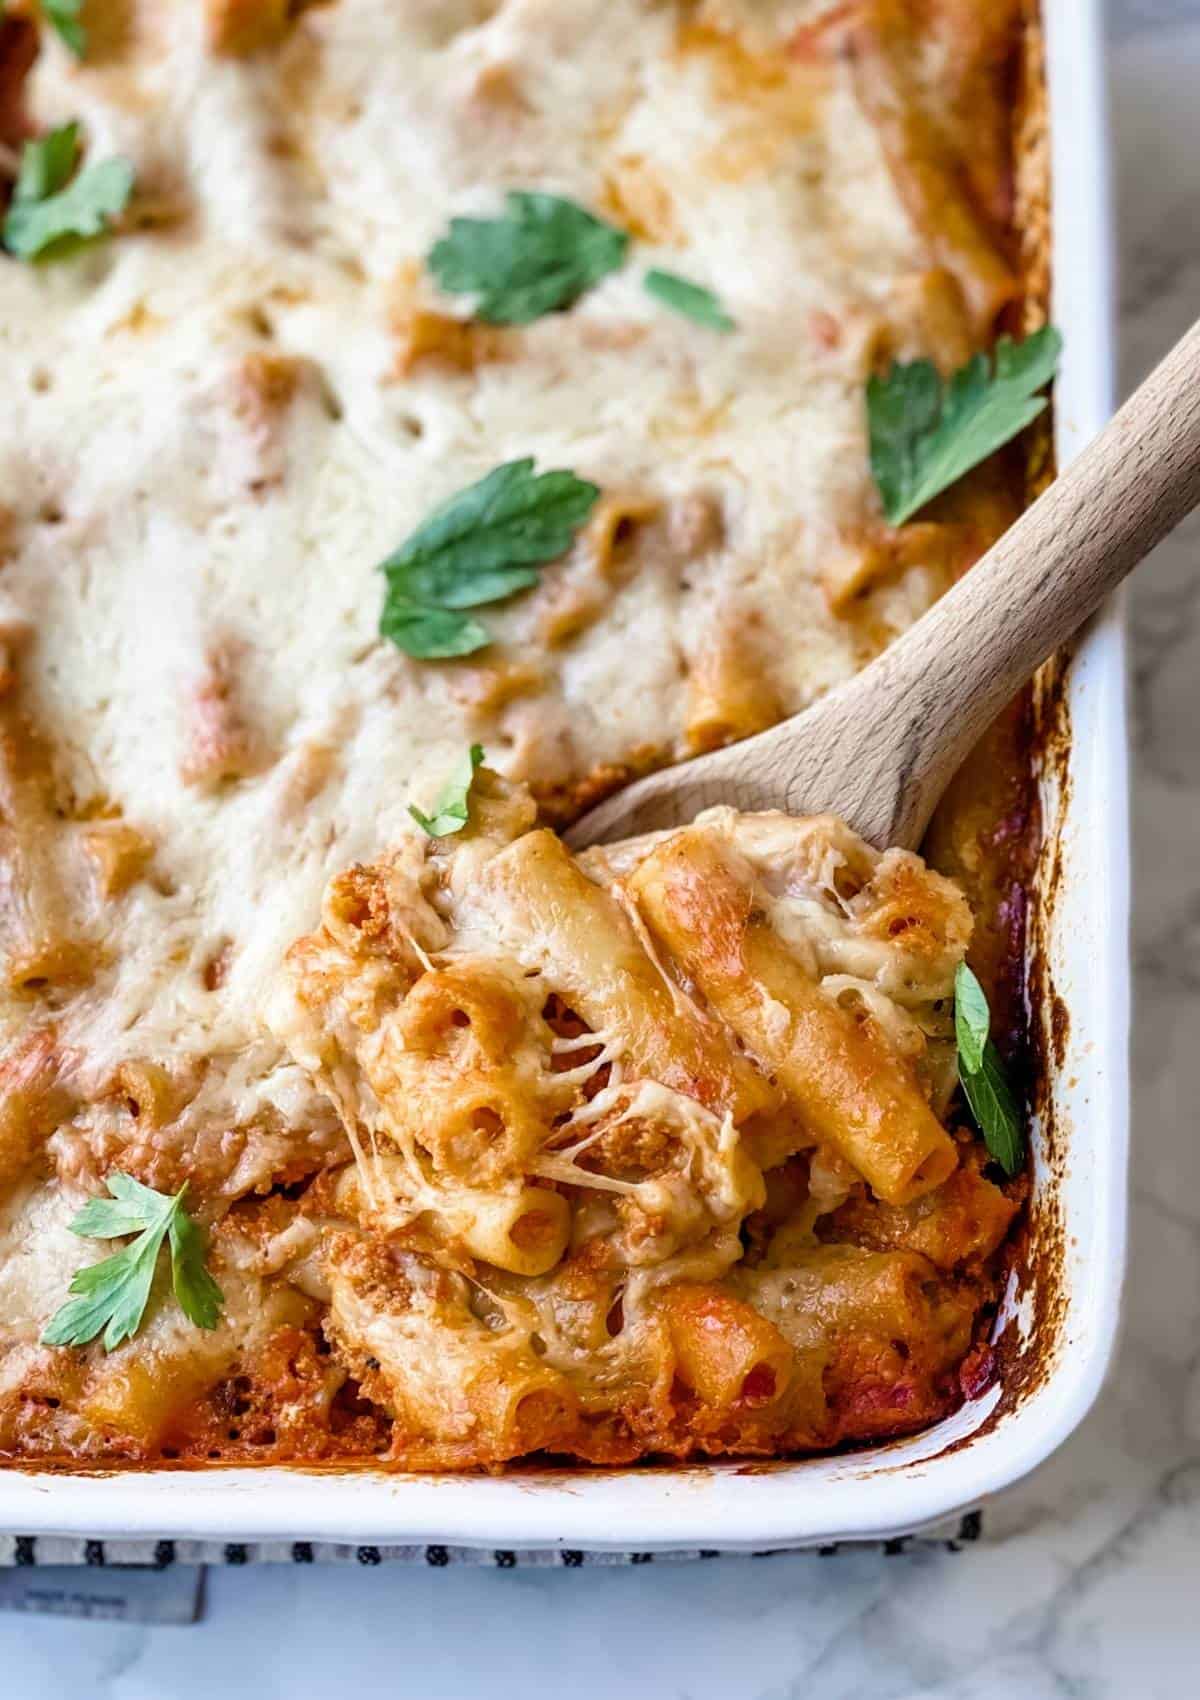 baked pasta recipe with sauce and cheese